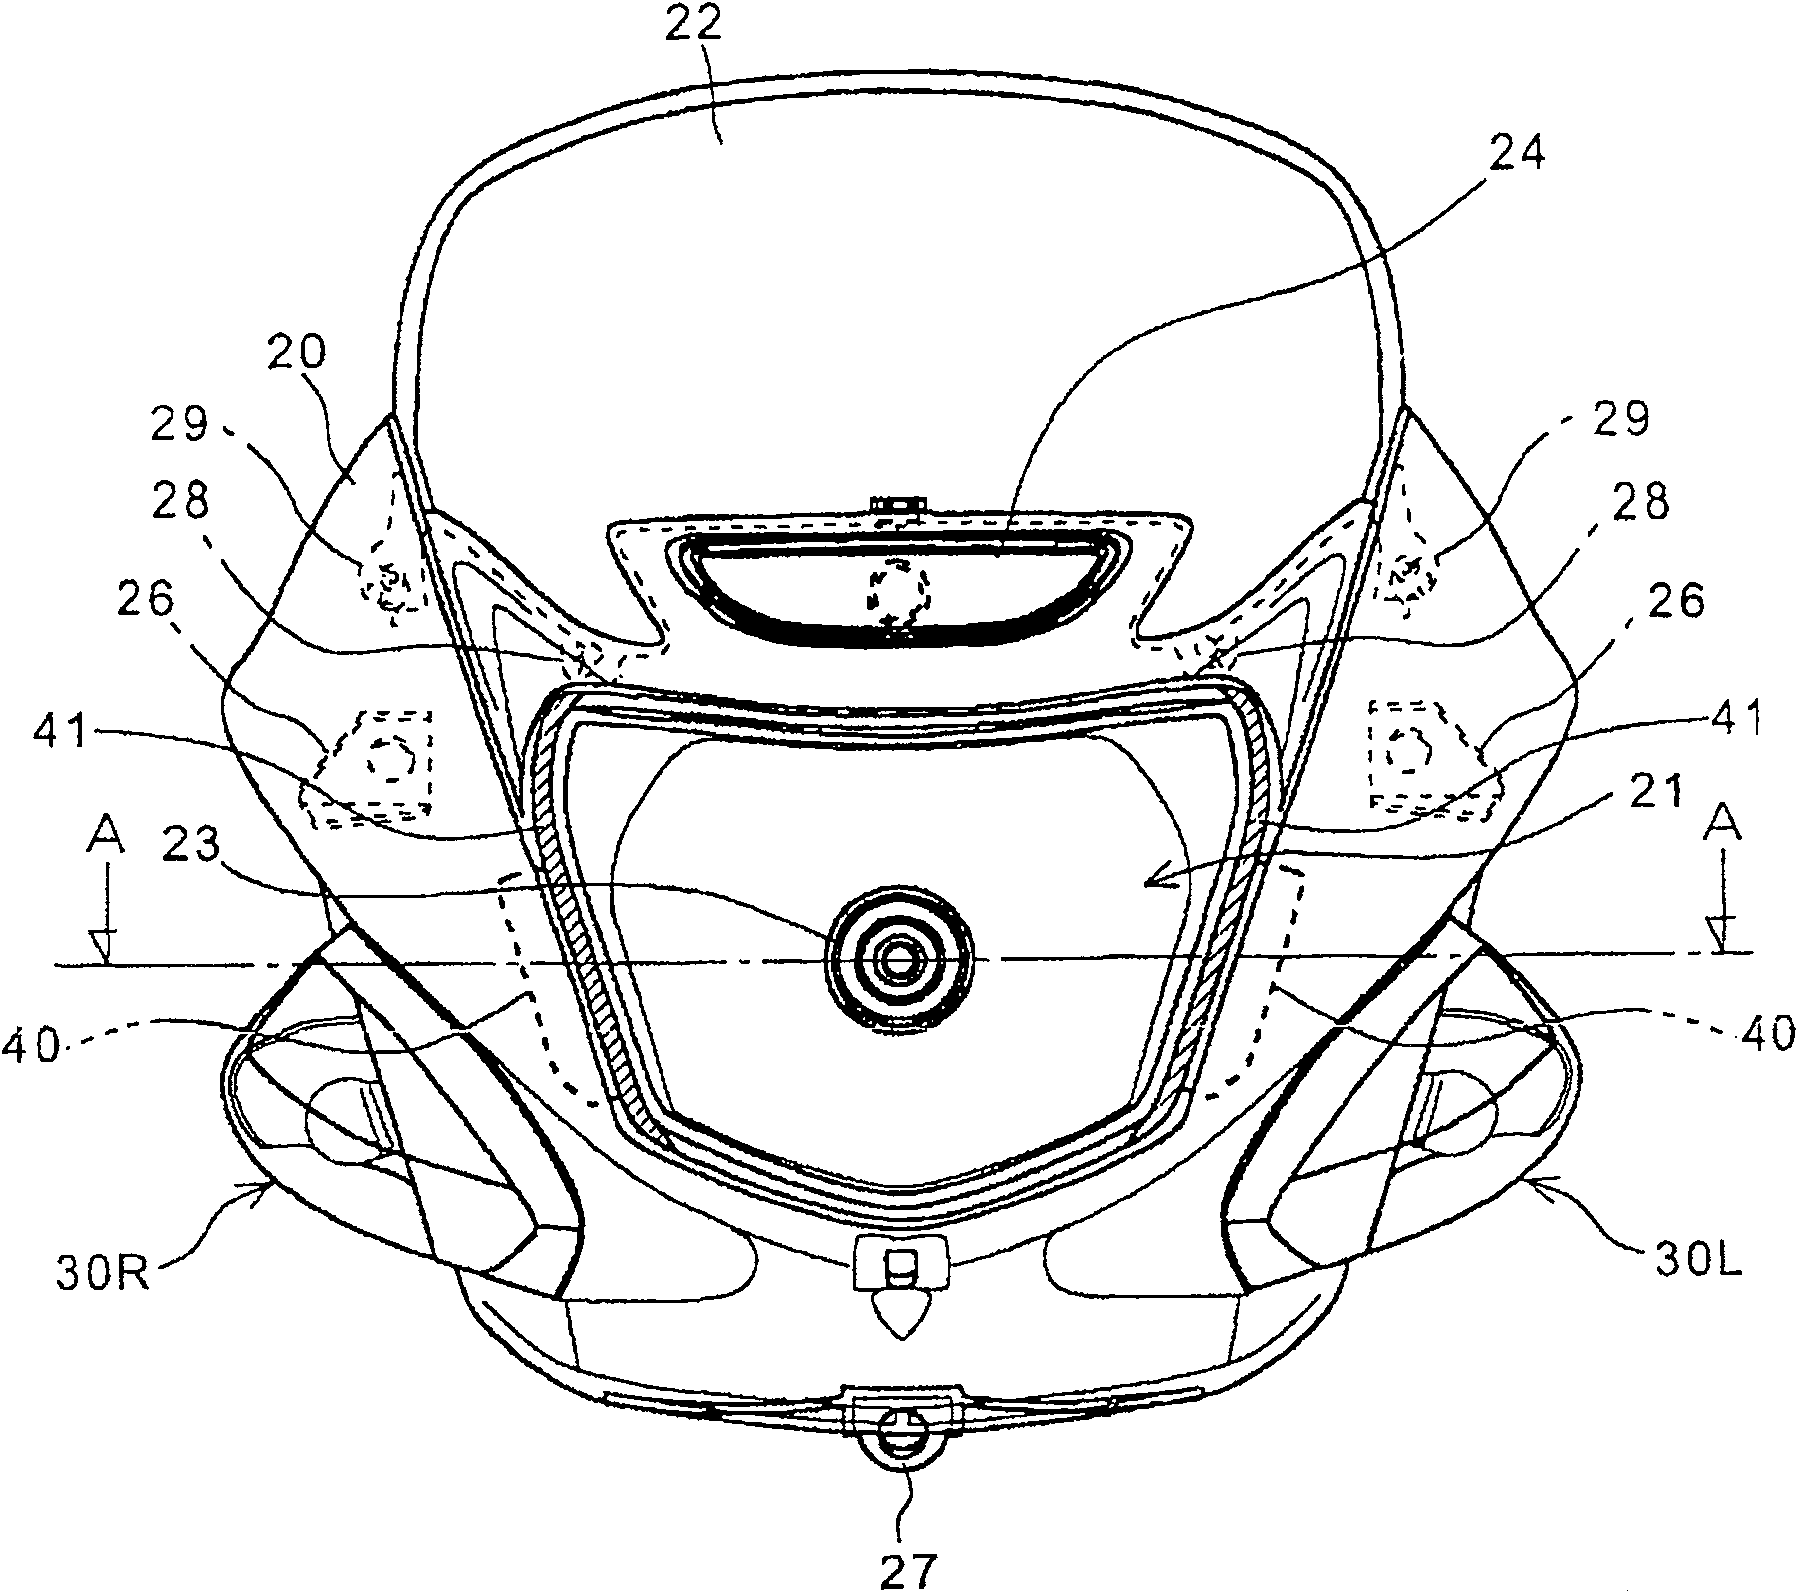 Head lamp device for motor bicycle